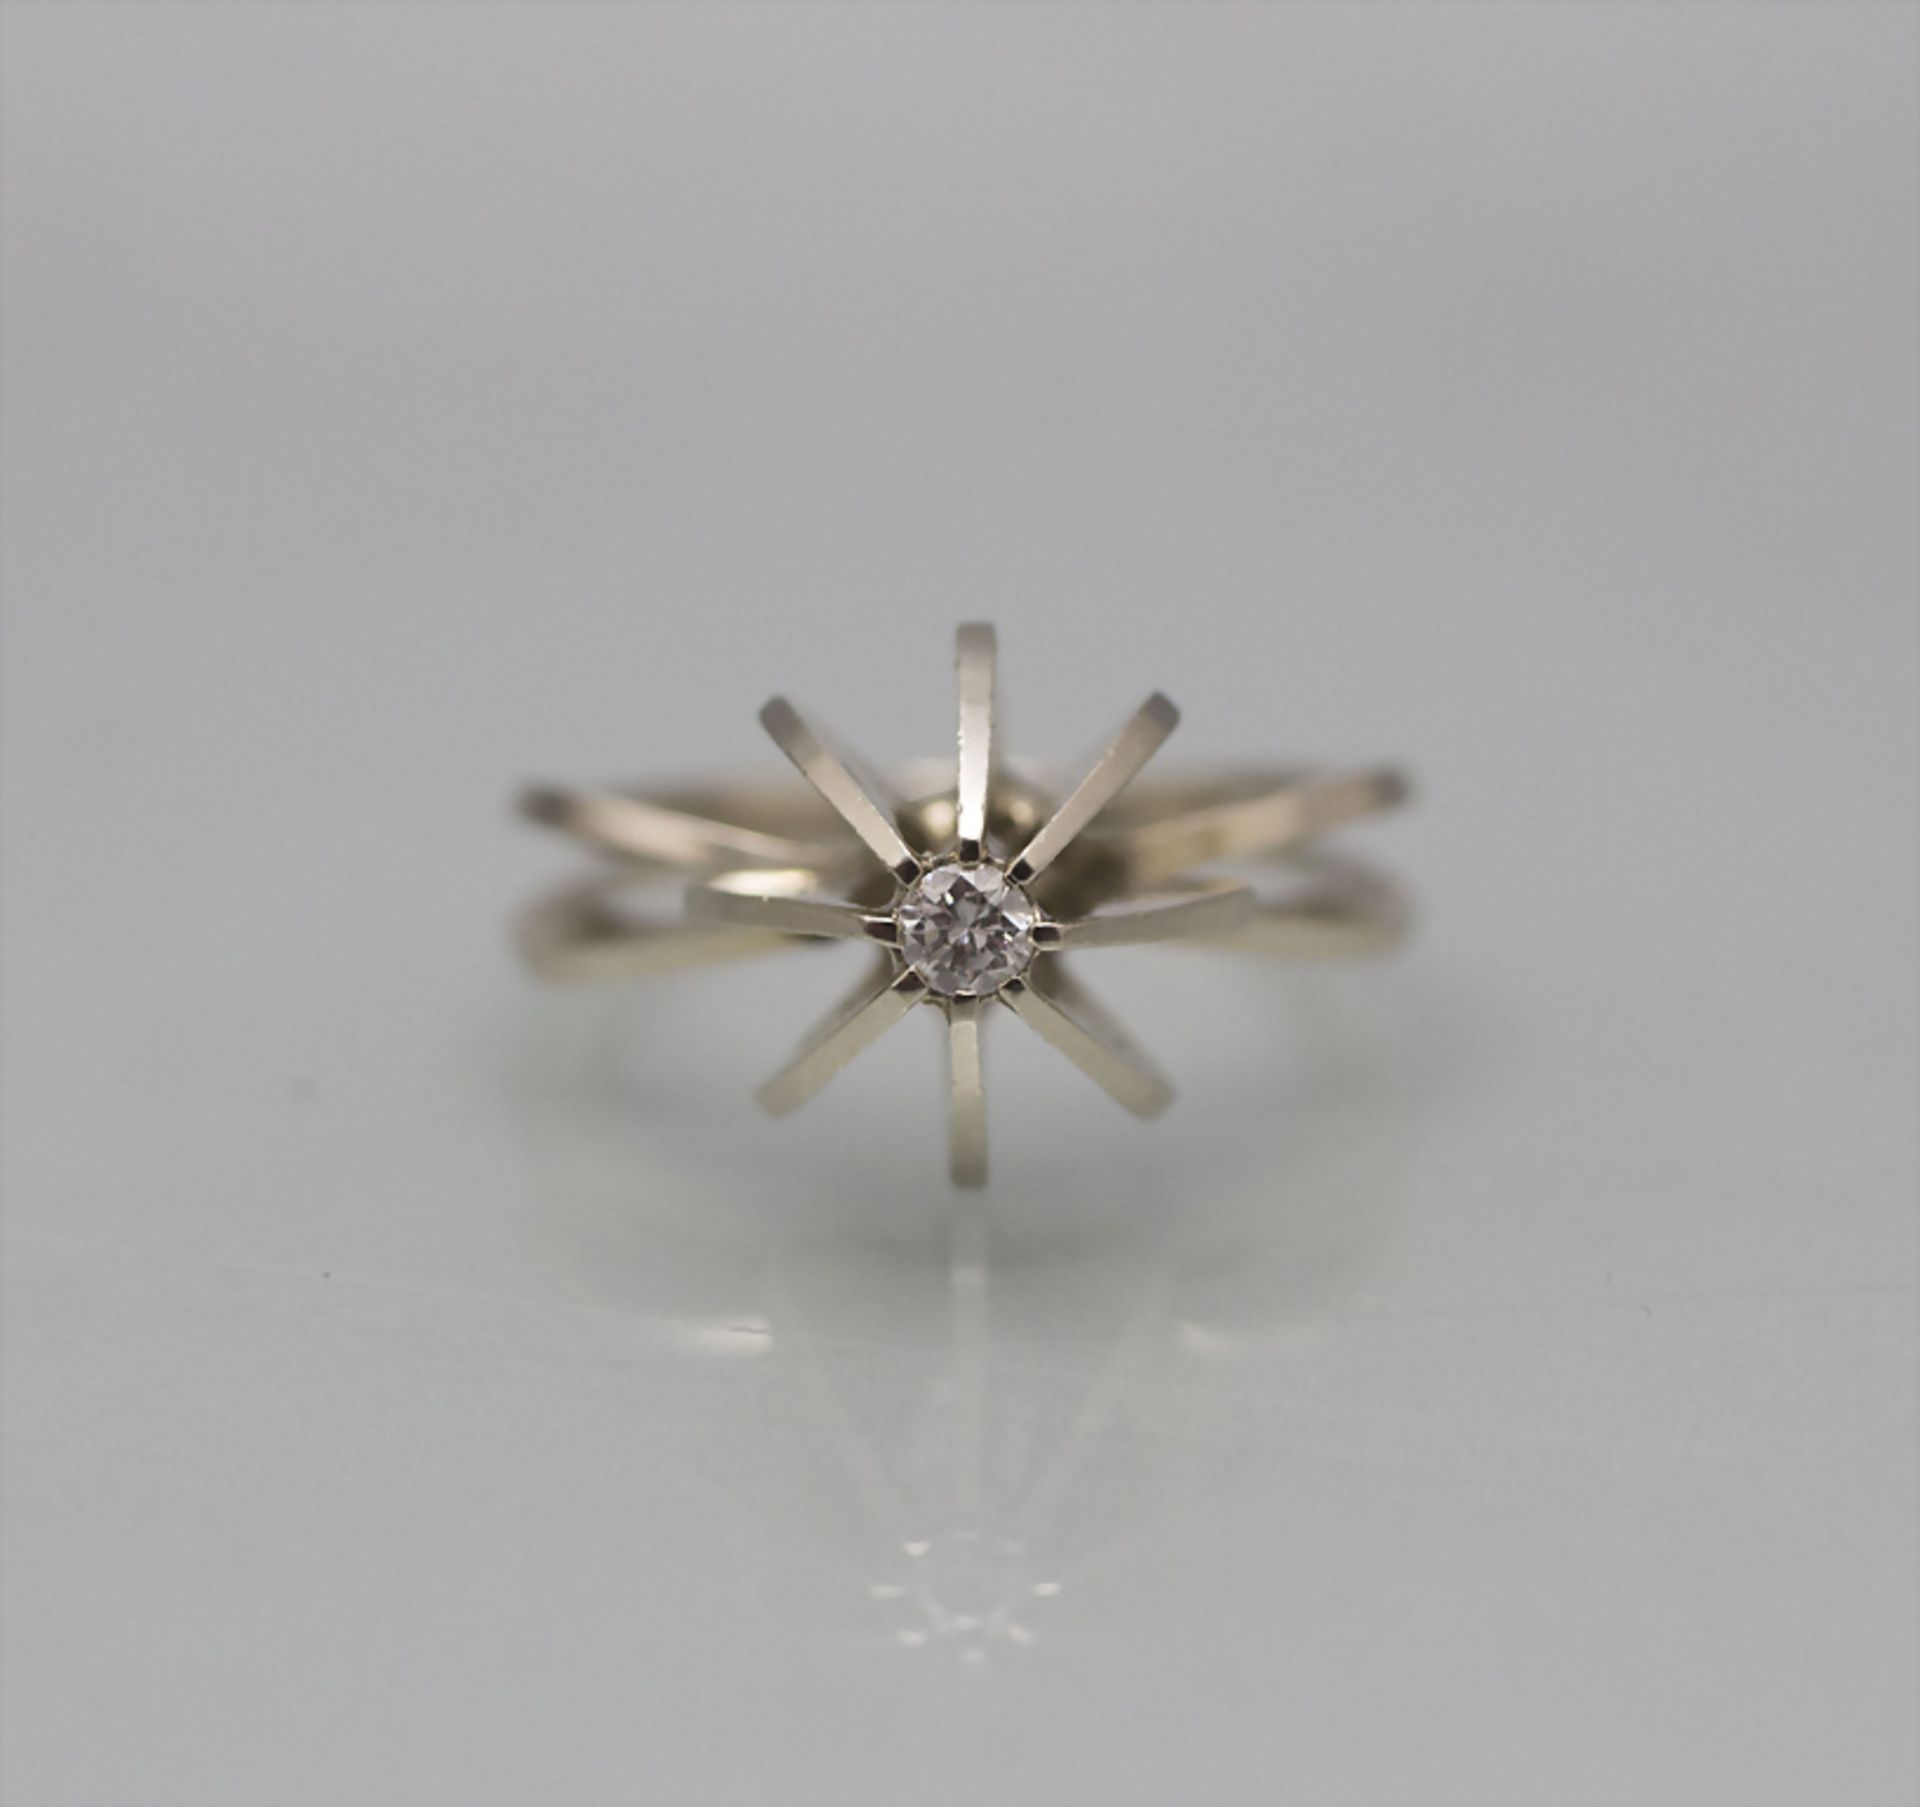 Damenring mit Brillant / A ladies 18 ct gold ring with diamond - Image 3 of 4